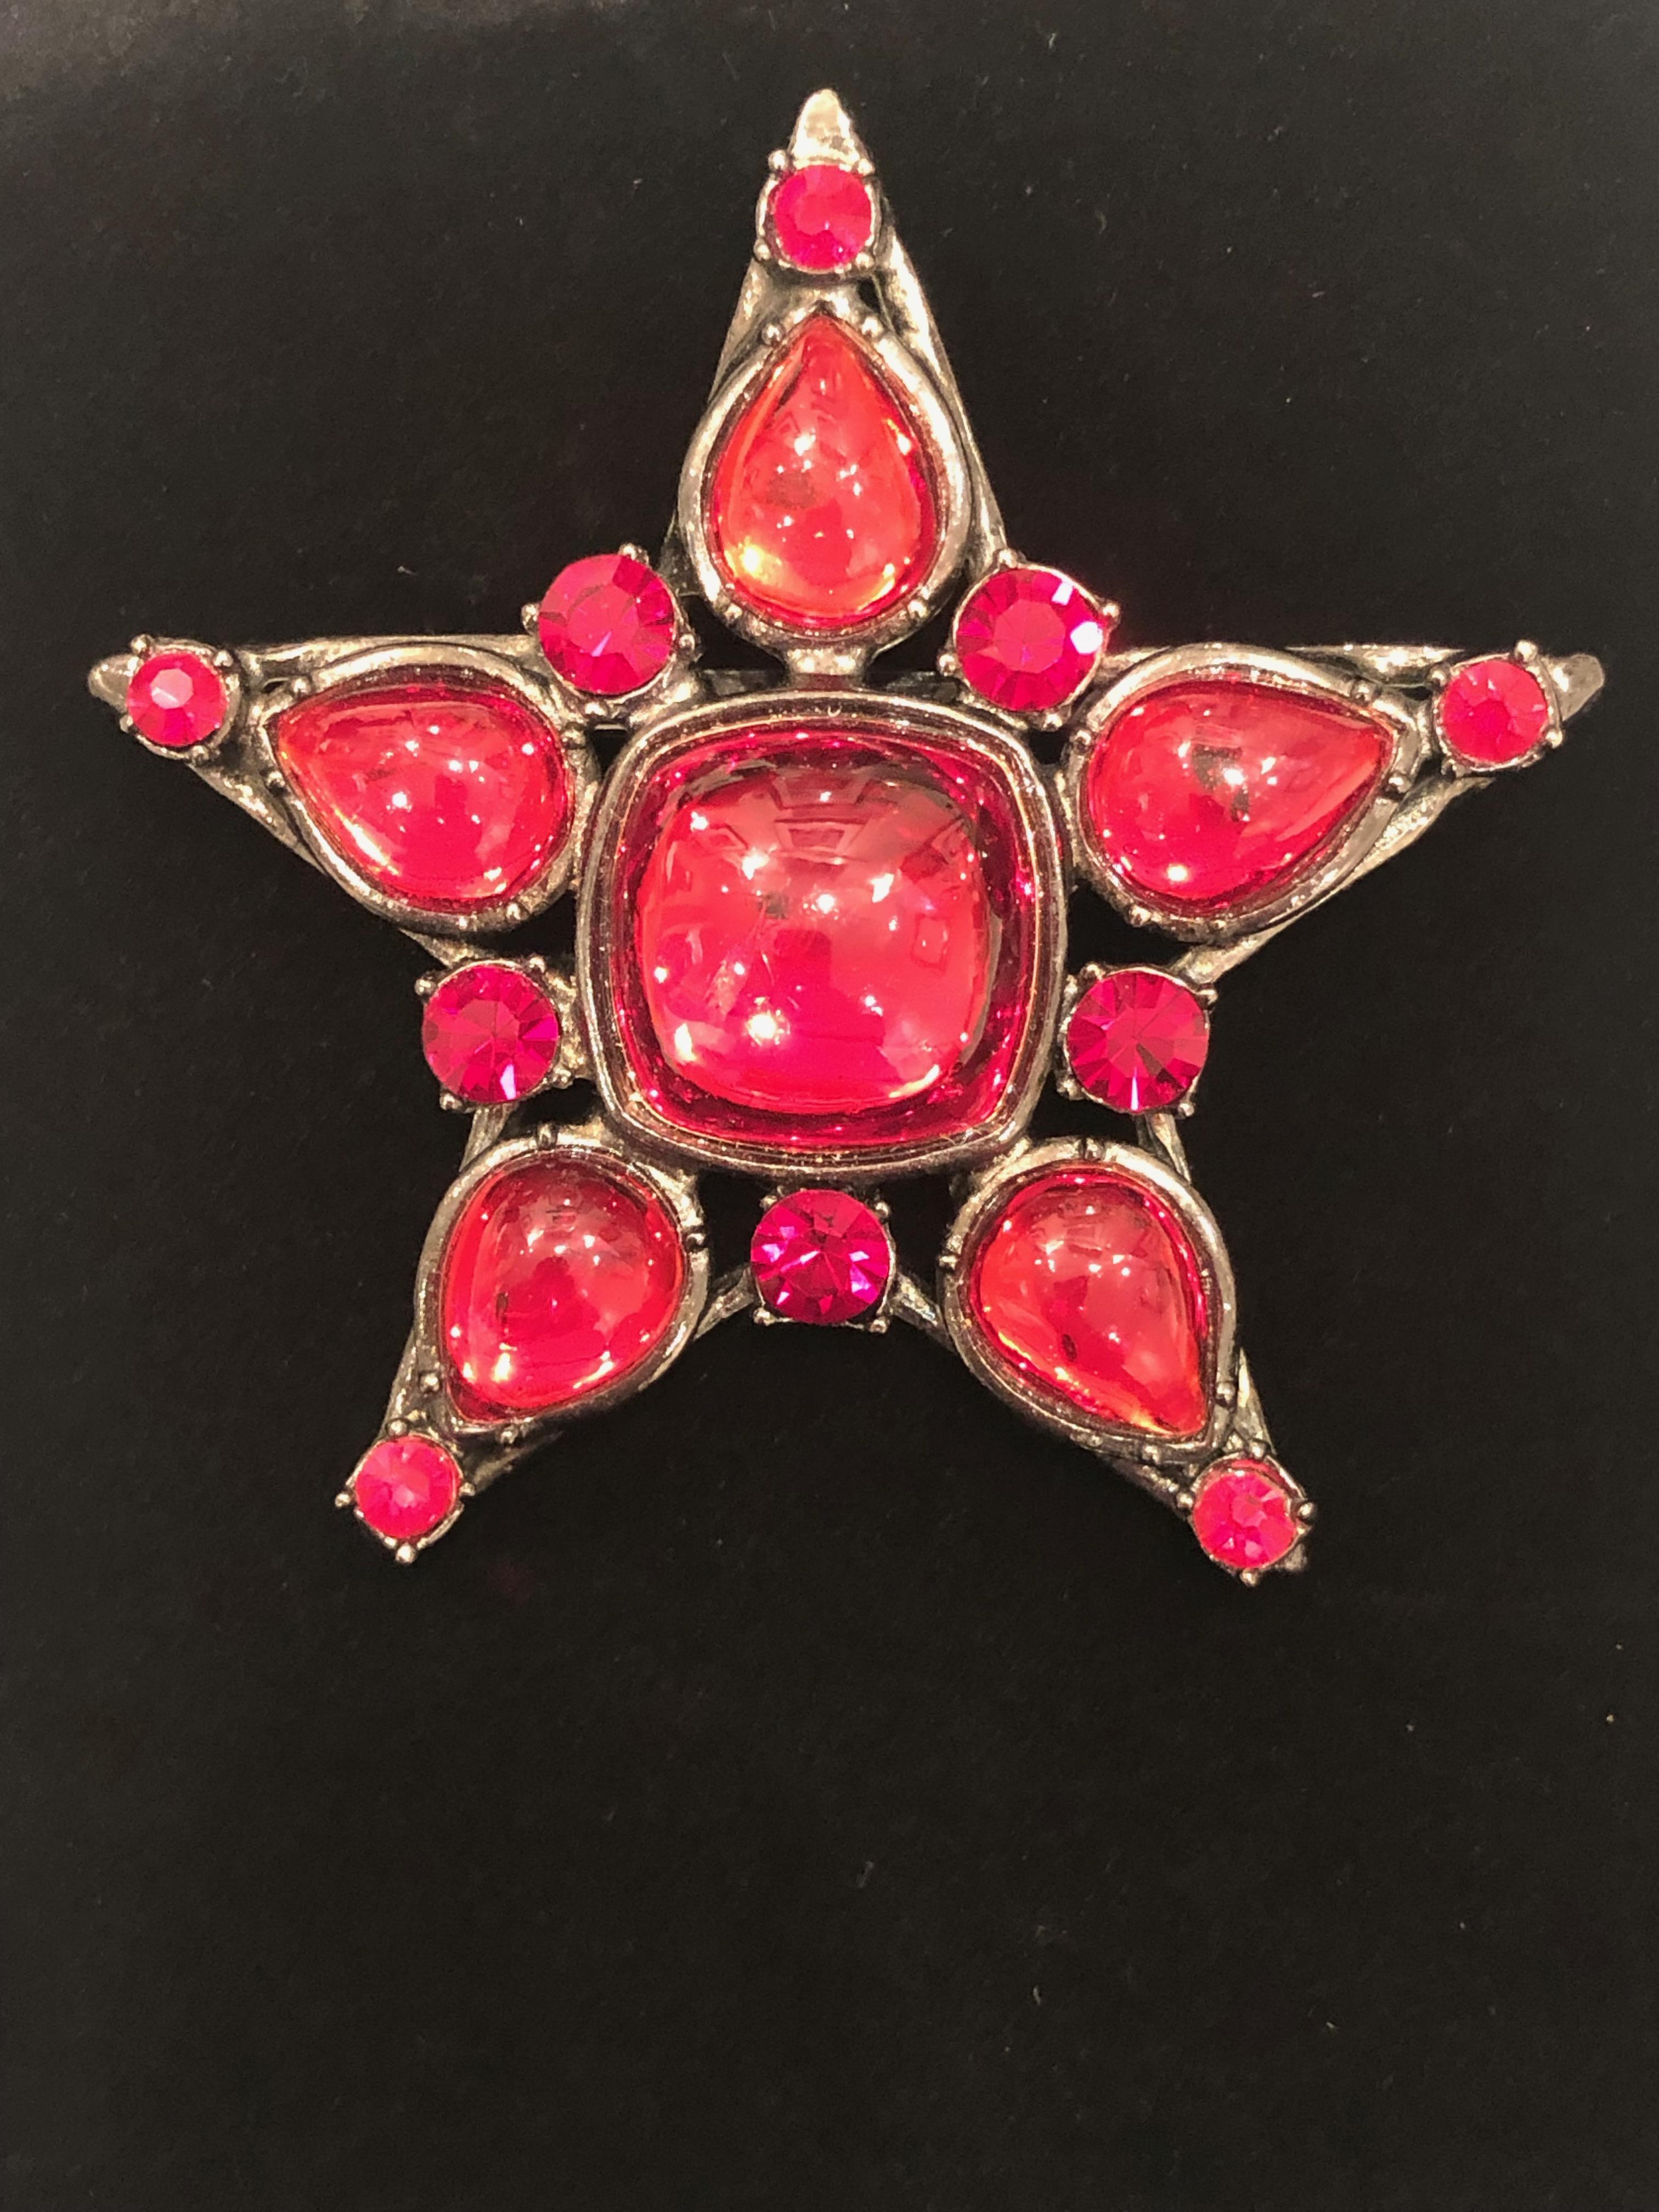 Yves Saint Laurent Rive Gauche Large Cabachon Faux Ruby Vintage Star Pin Brooch.
Large faux ruby cabachons set in antique gold tone metal.
3